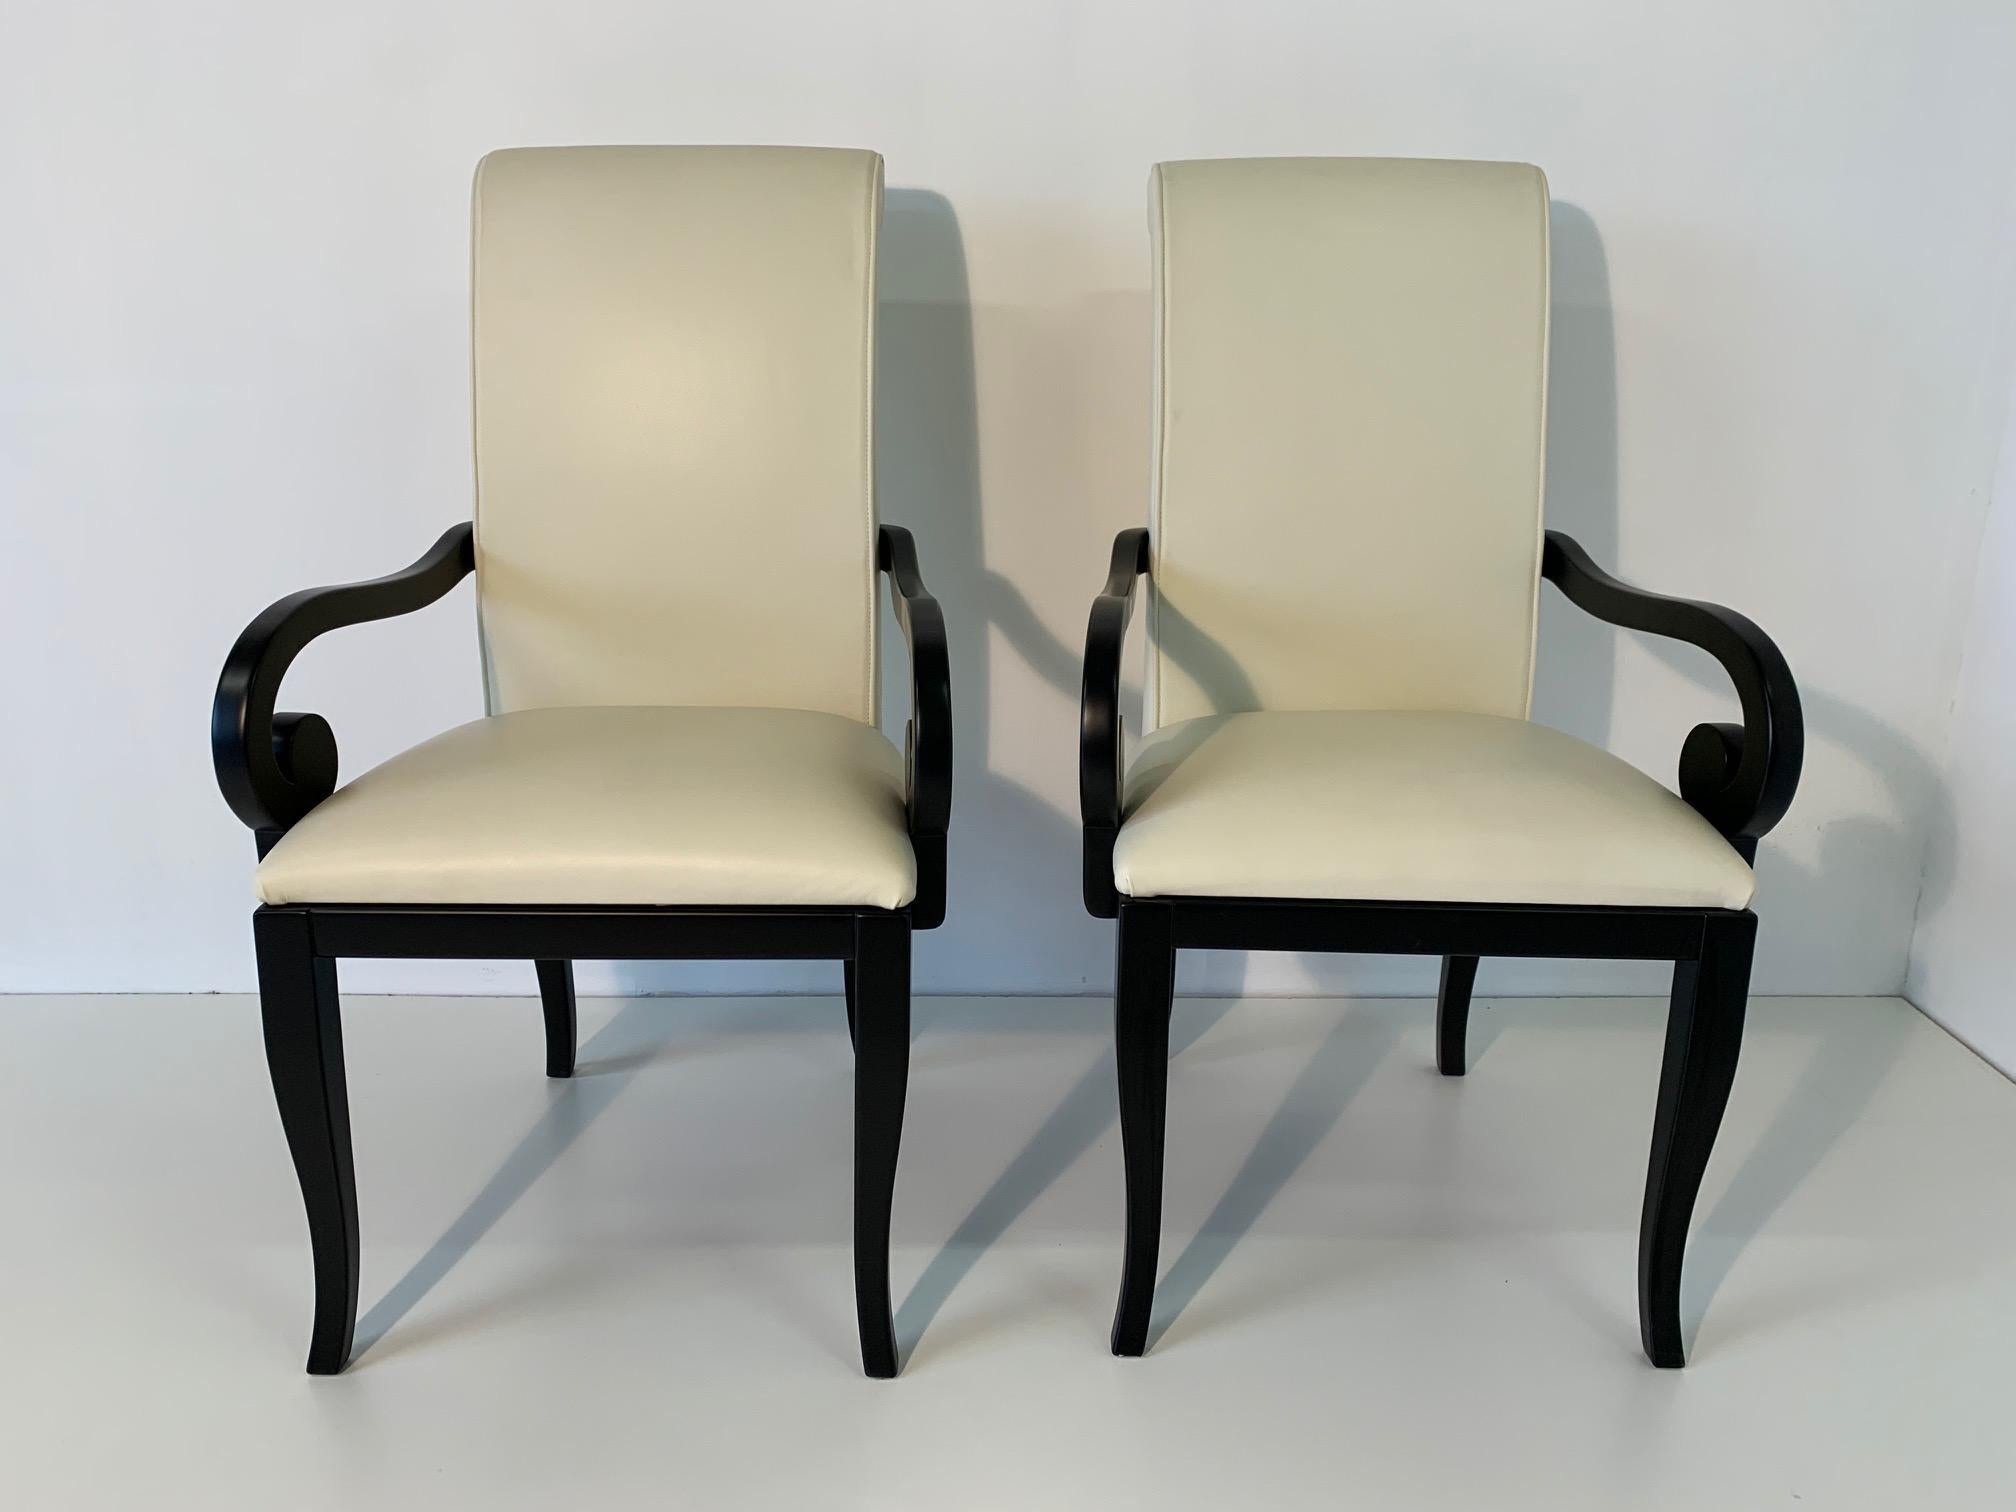 Elegant chairs with armrests in Art Deco style, upholstered in fine ivory Italian leather.
The structure is made of black lacquered wood.
Both chairs have recently been completely restored.